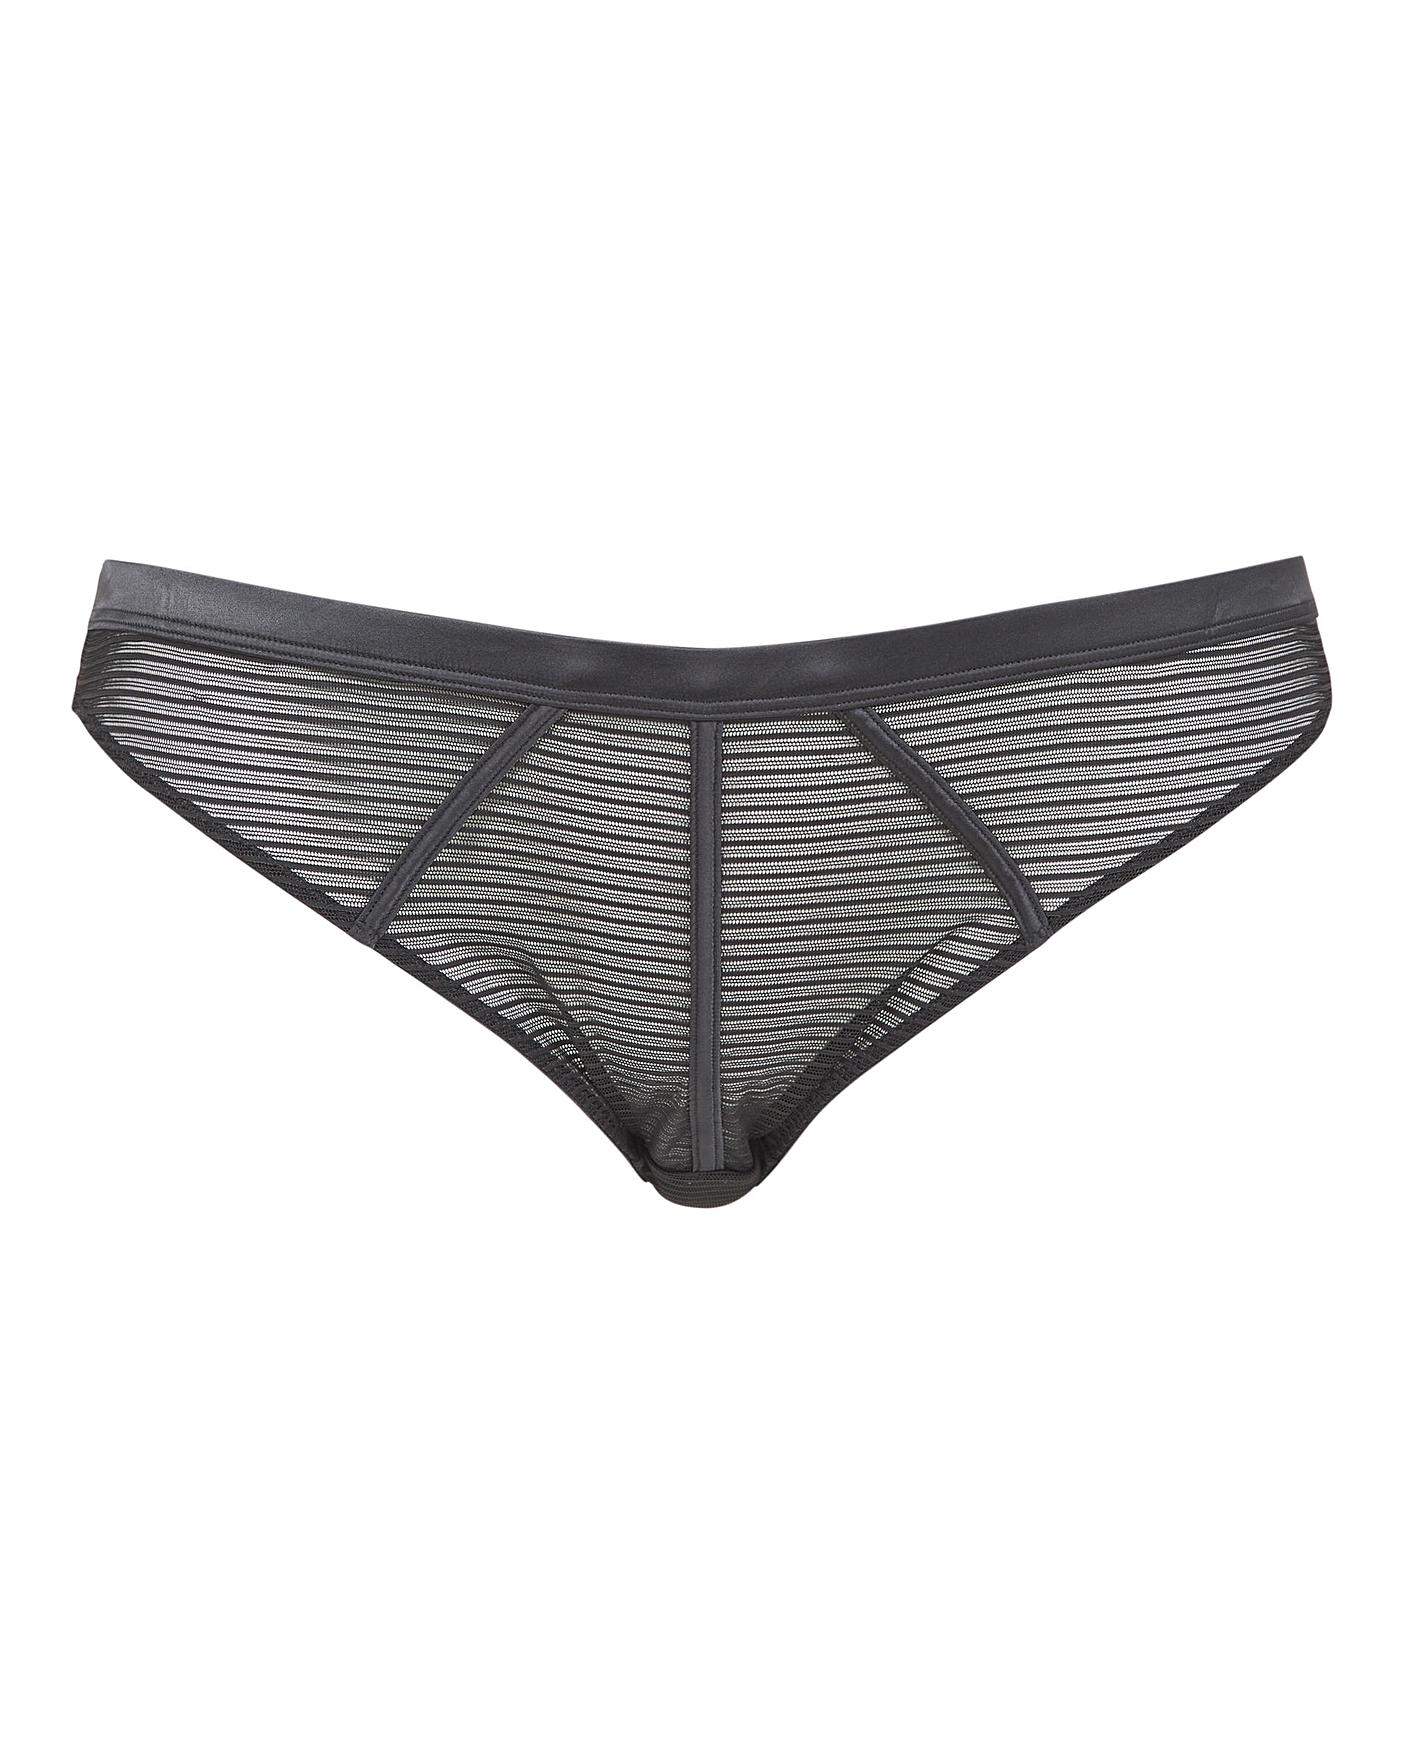 Figleaves Pimlico Thong, £16.00